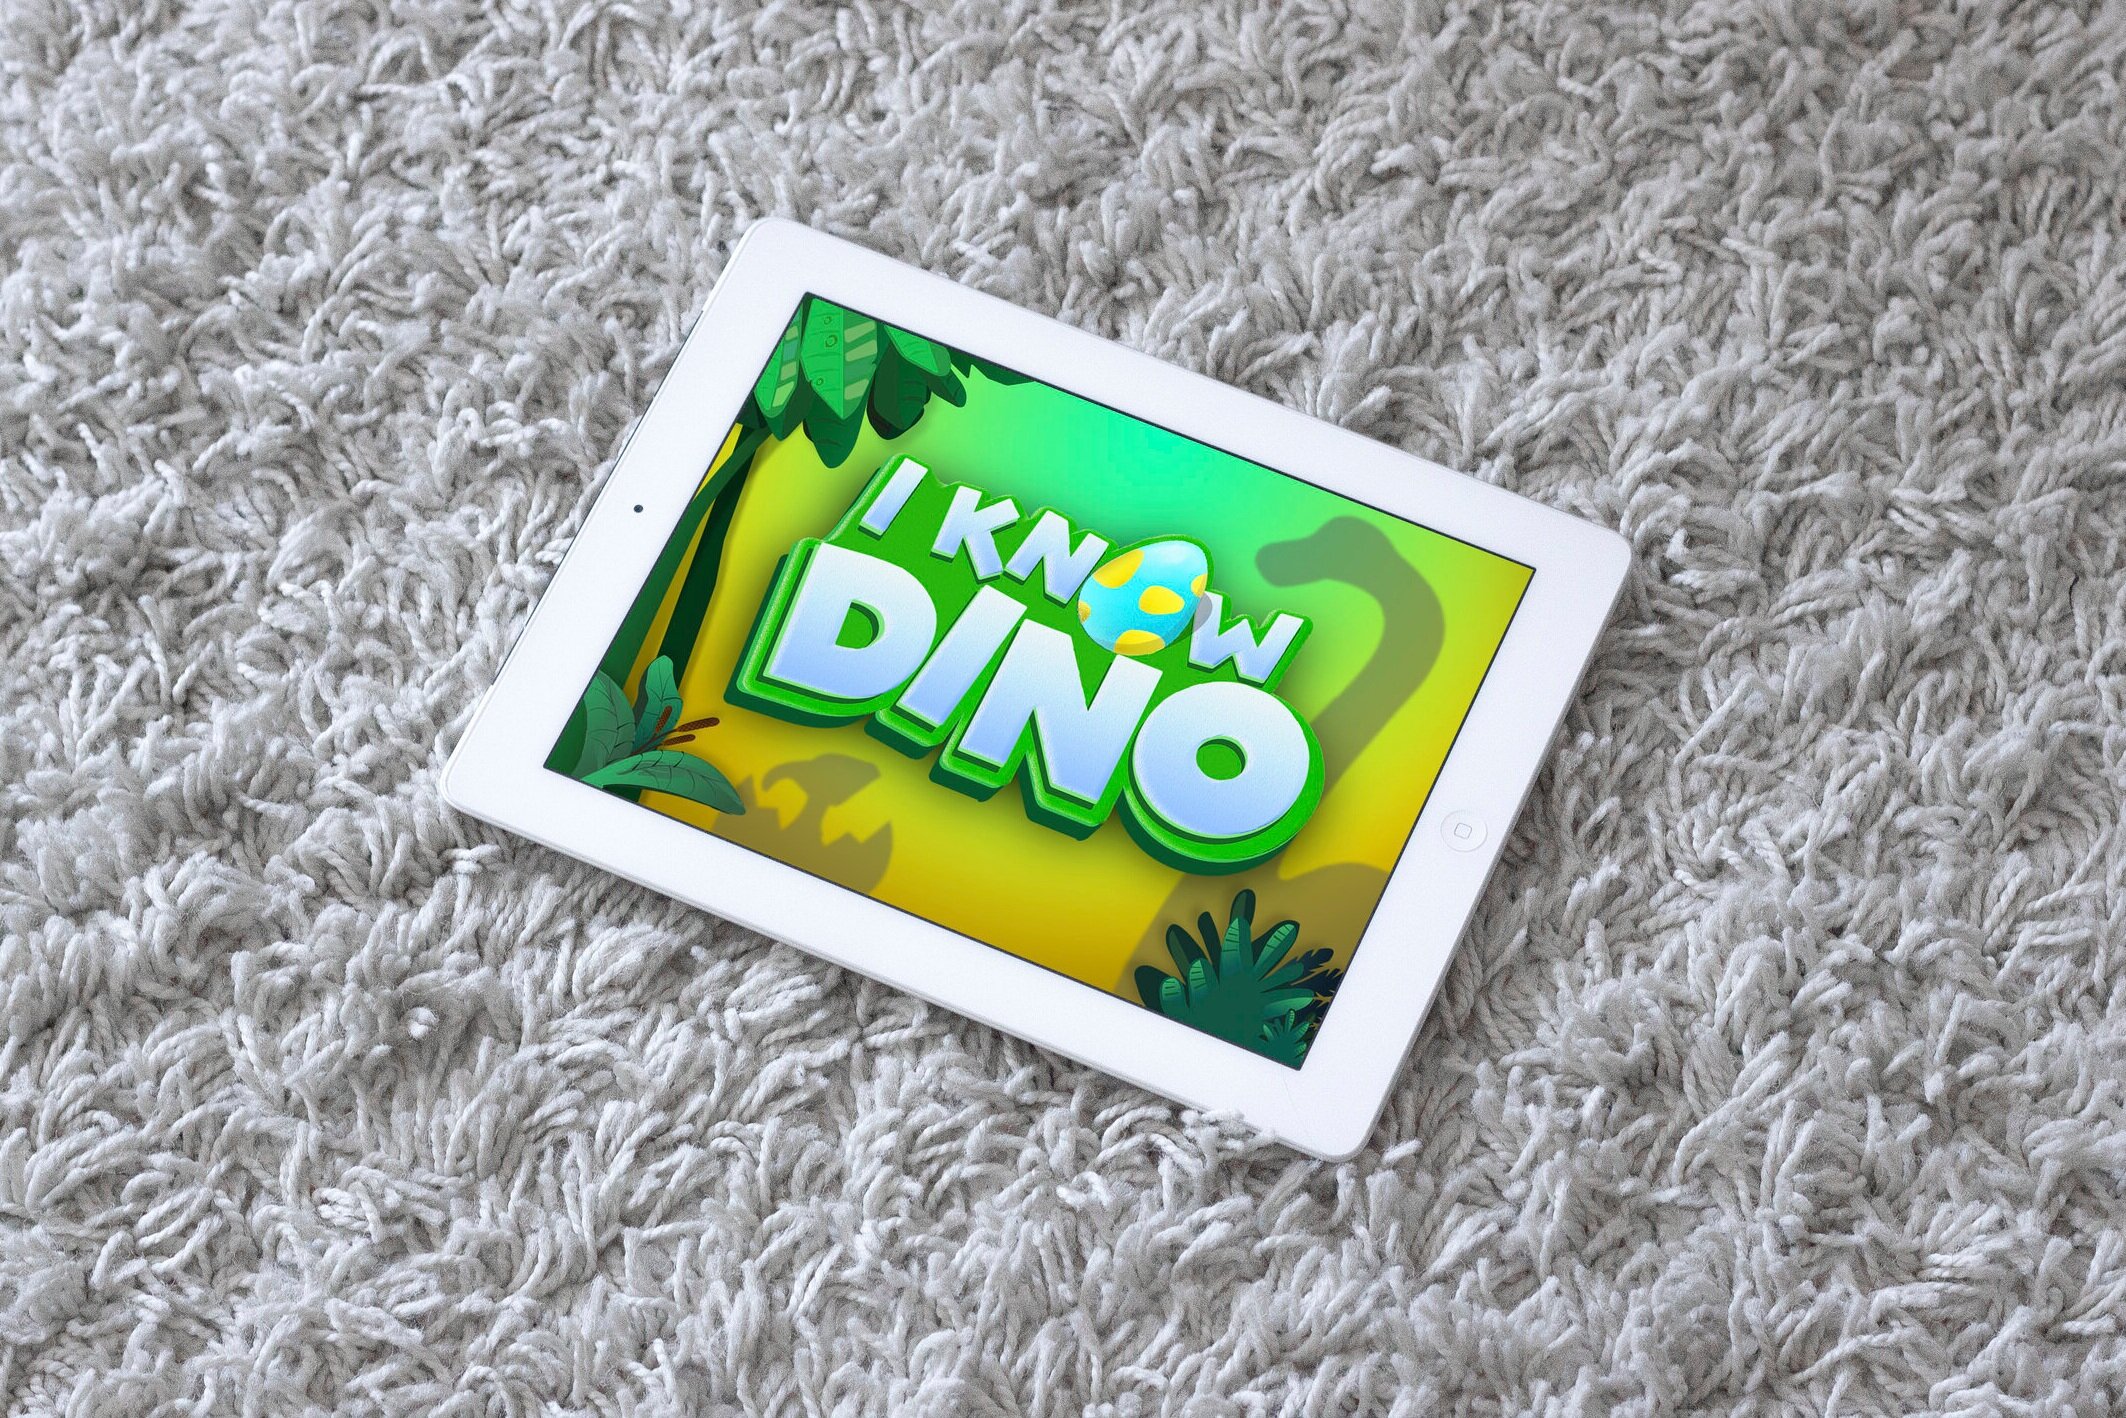 I Know Dino: App (Passion Project) — MARK CHIVERS